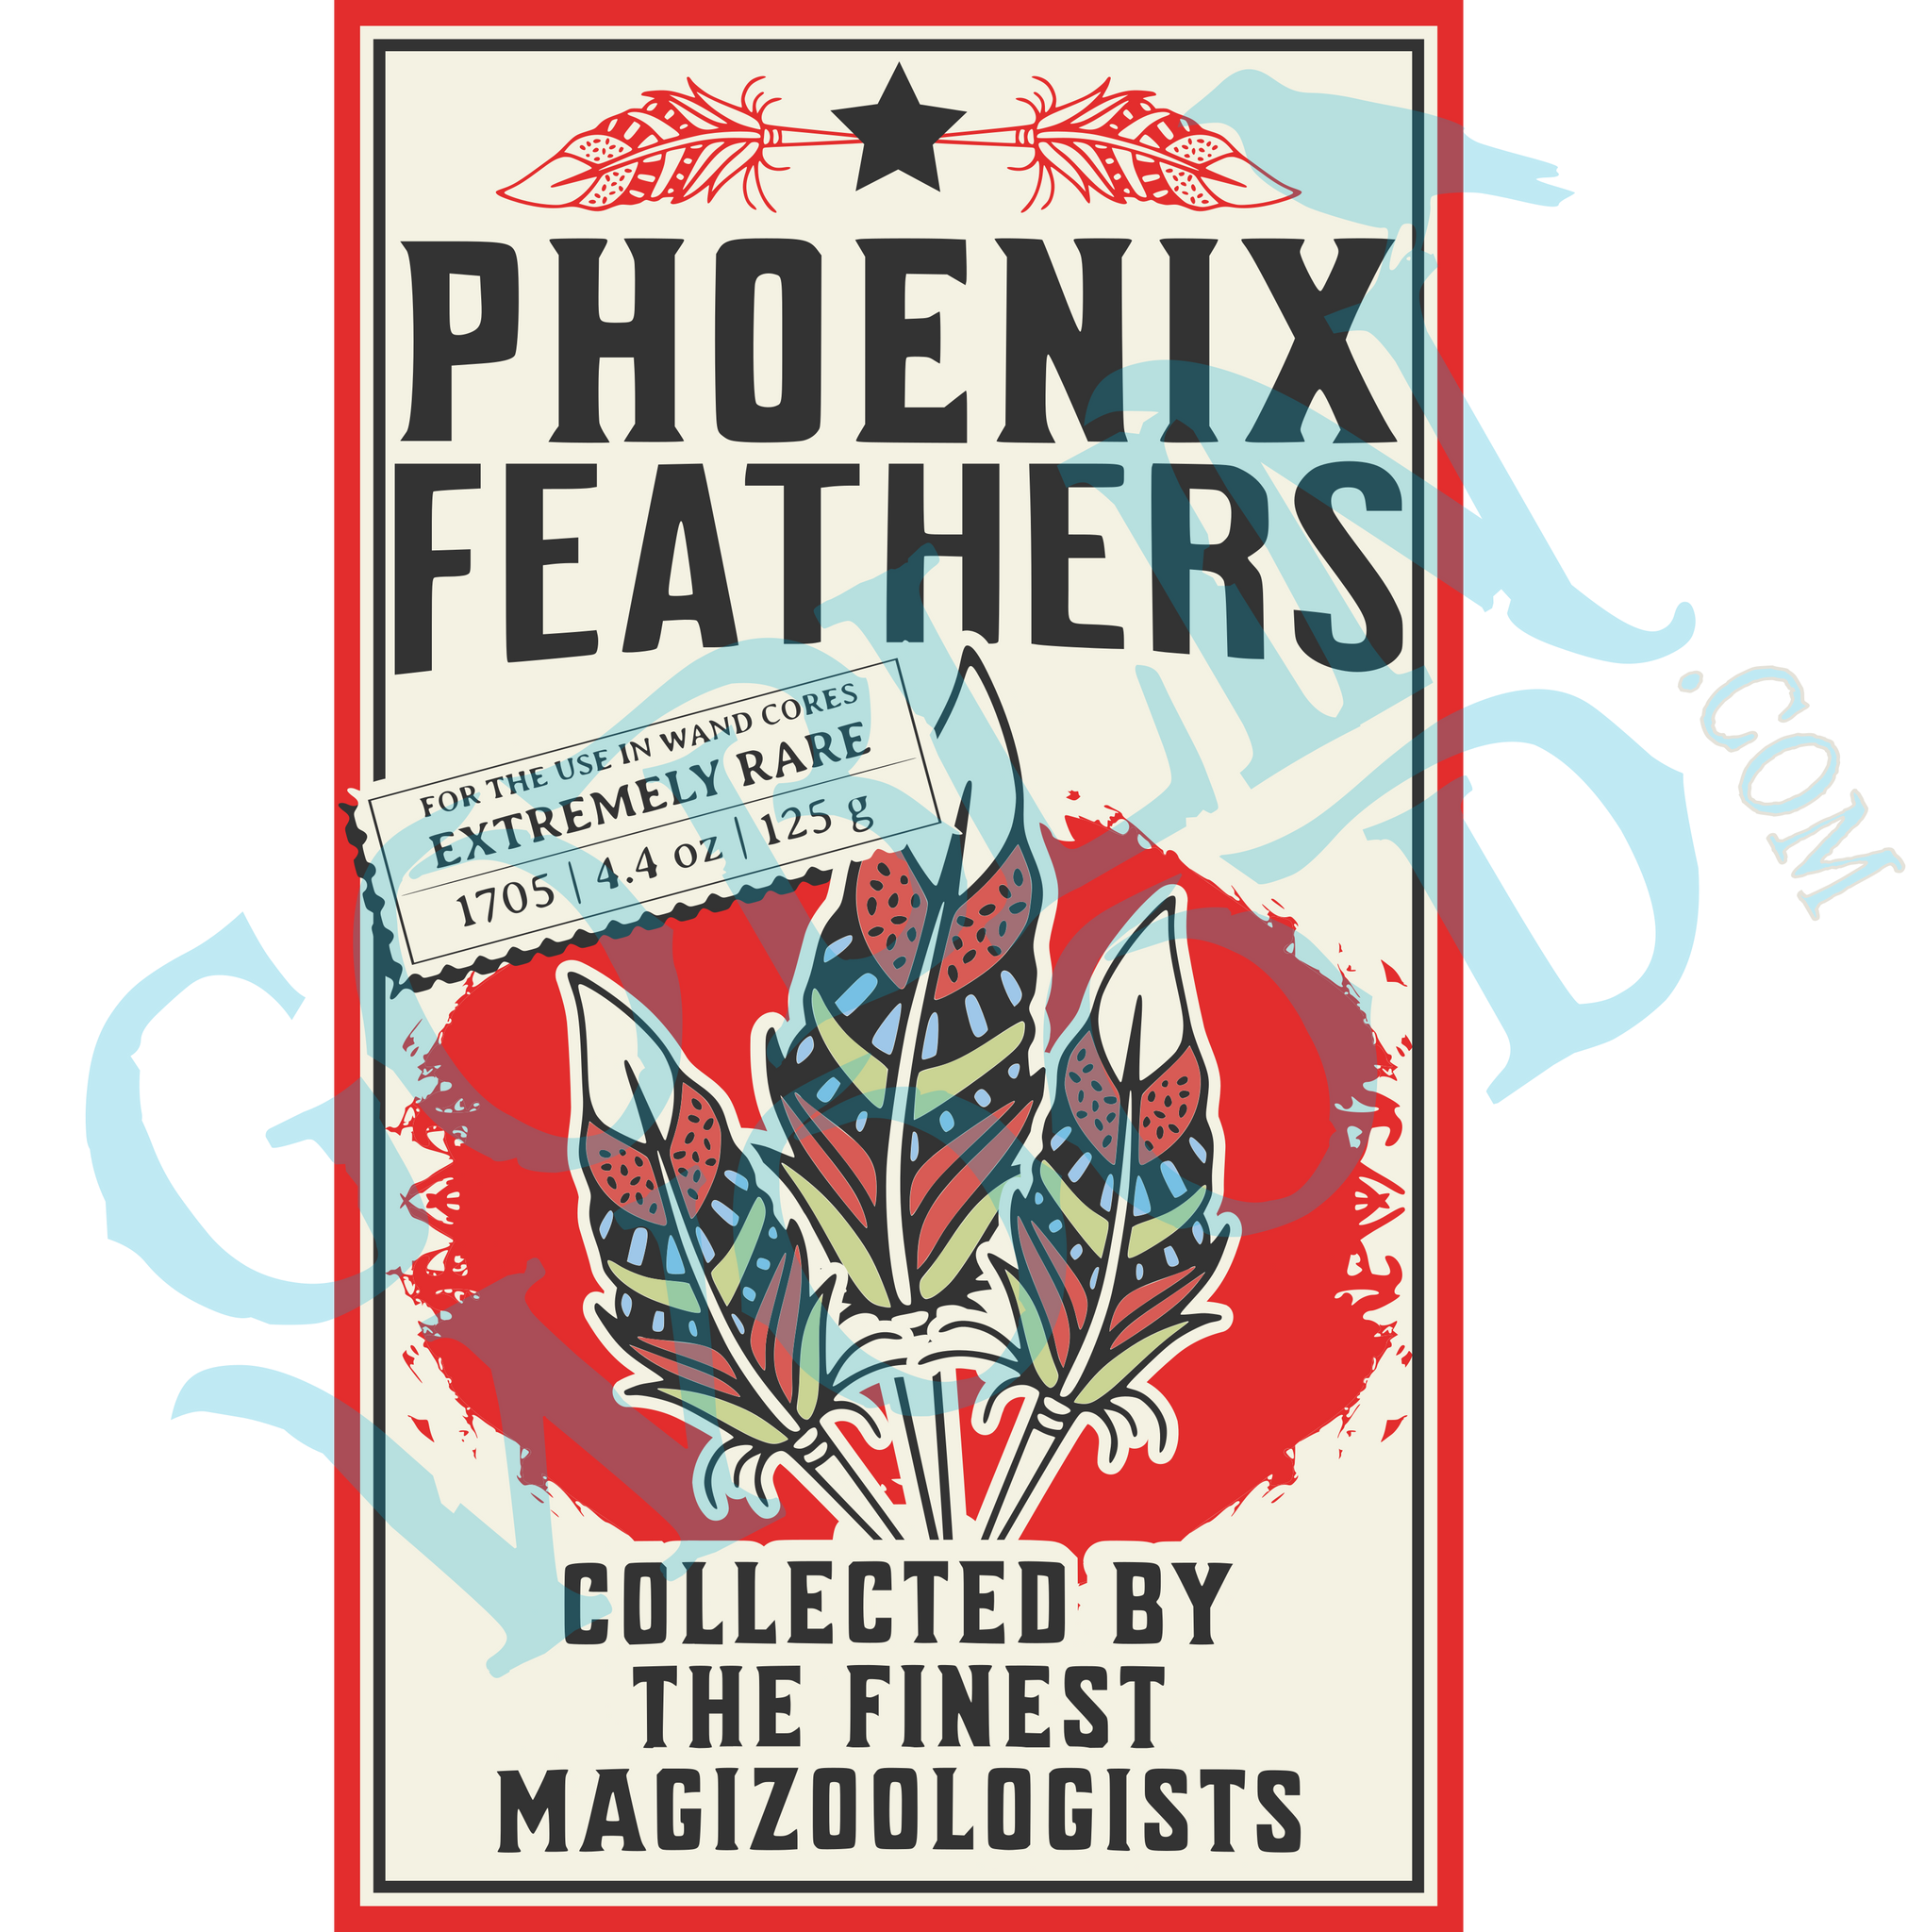 Phoenix feathers - Harry Potter Inspired